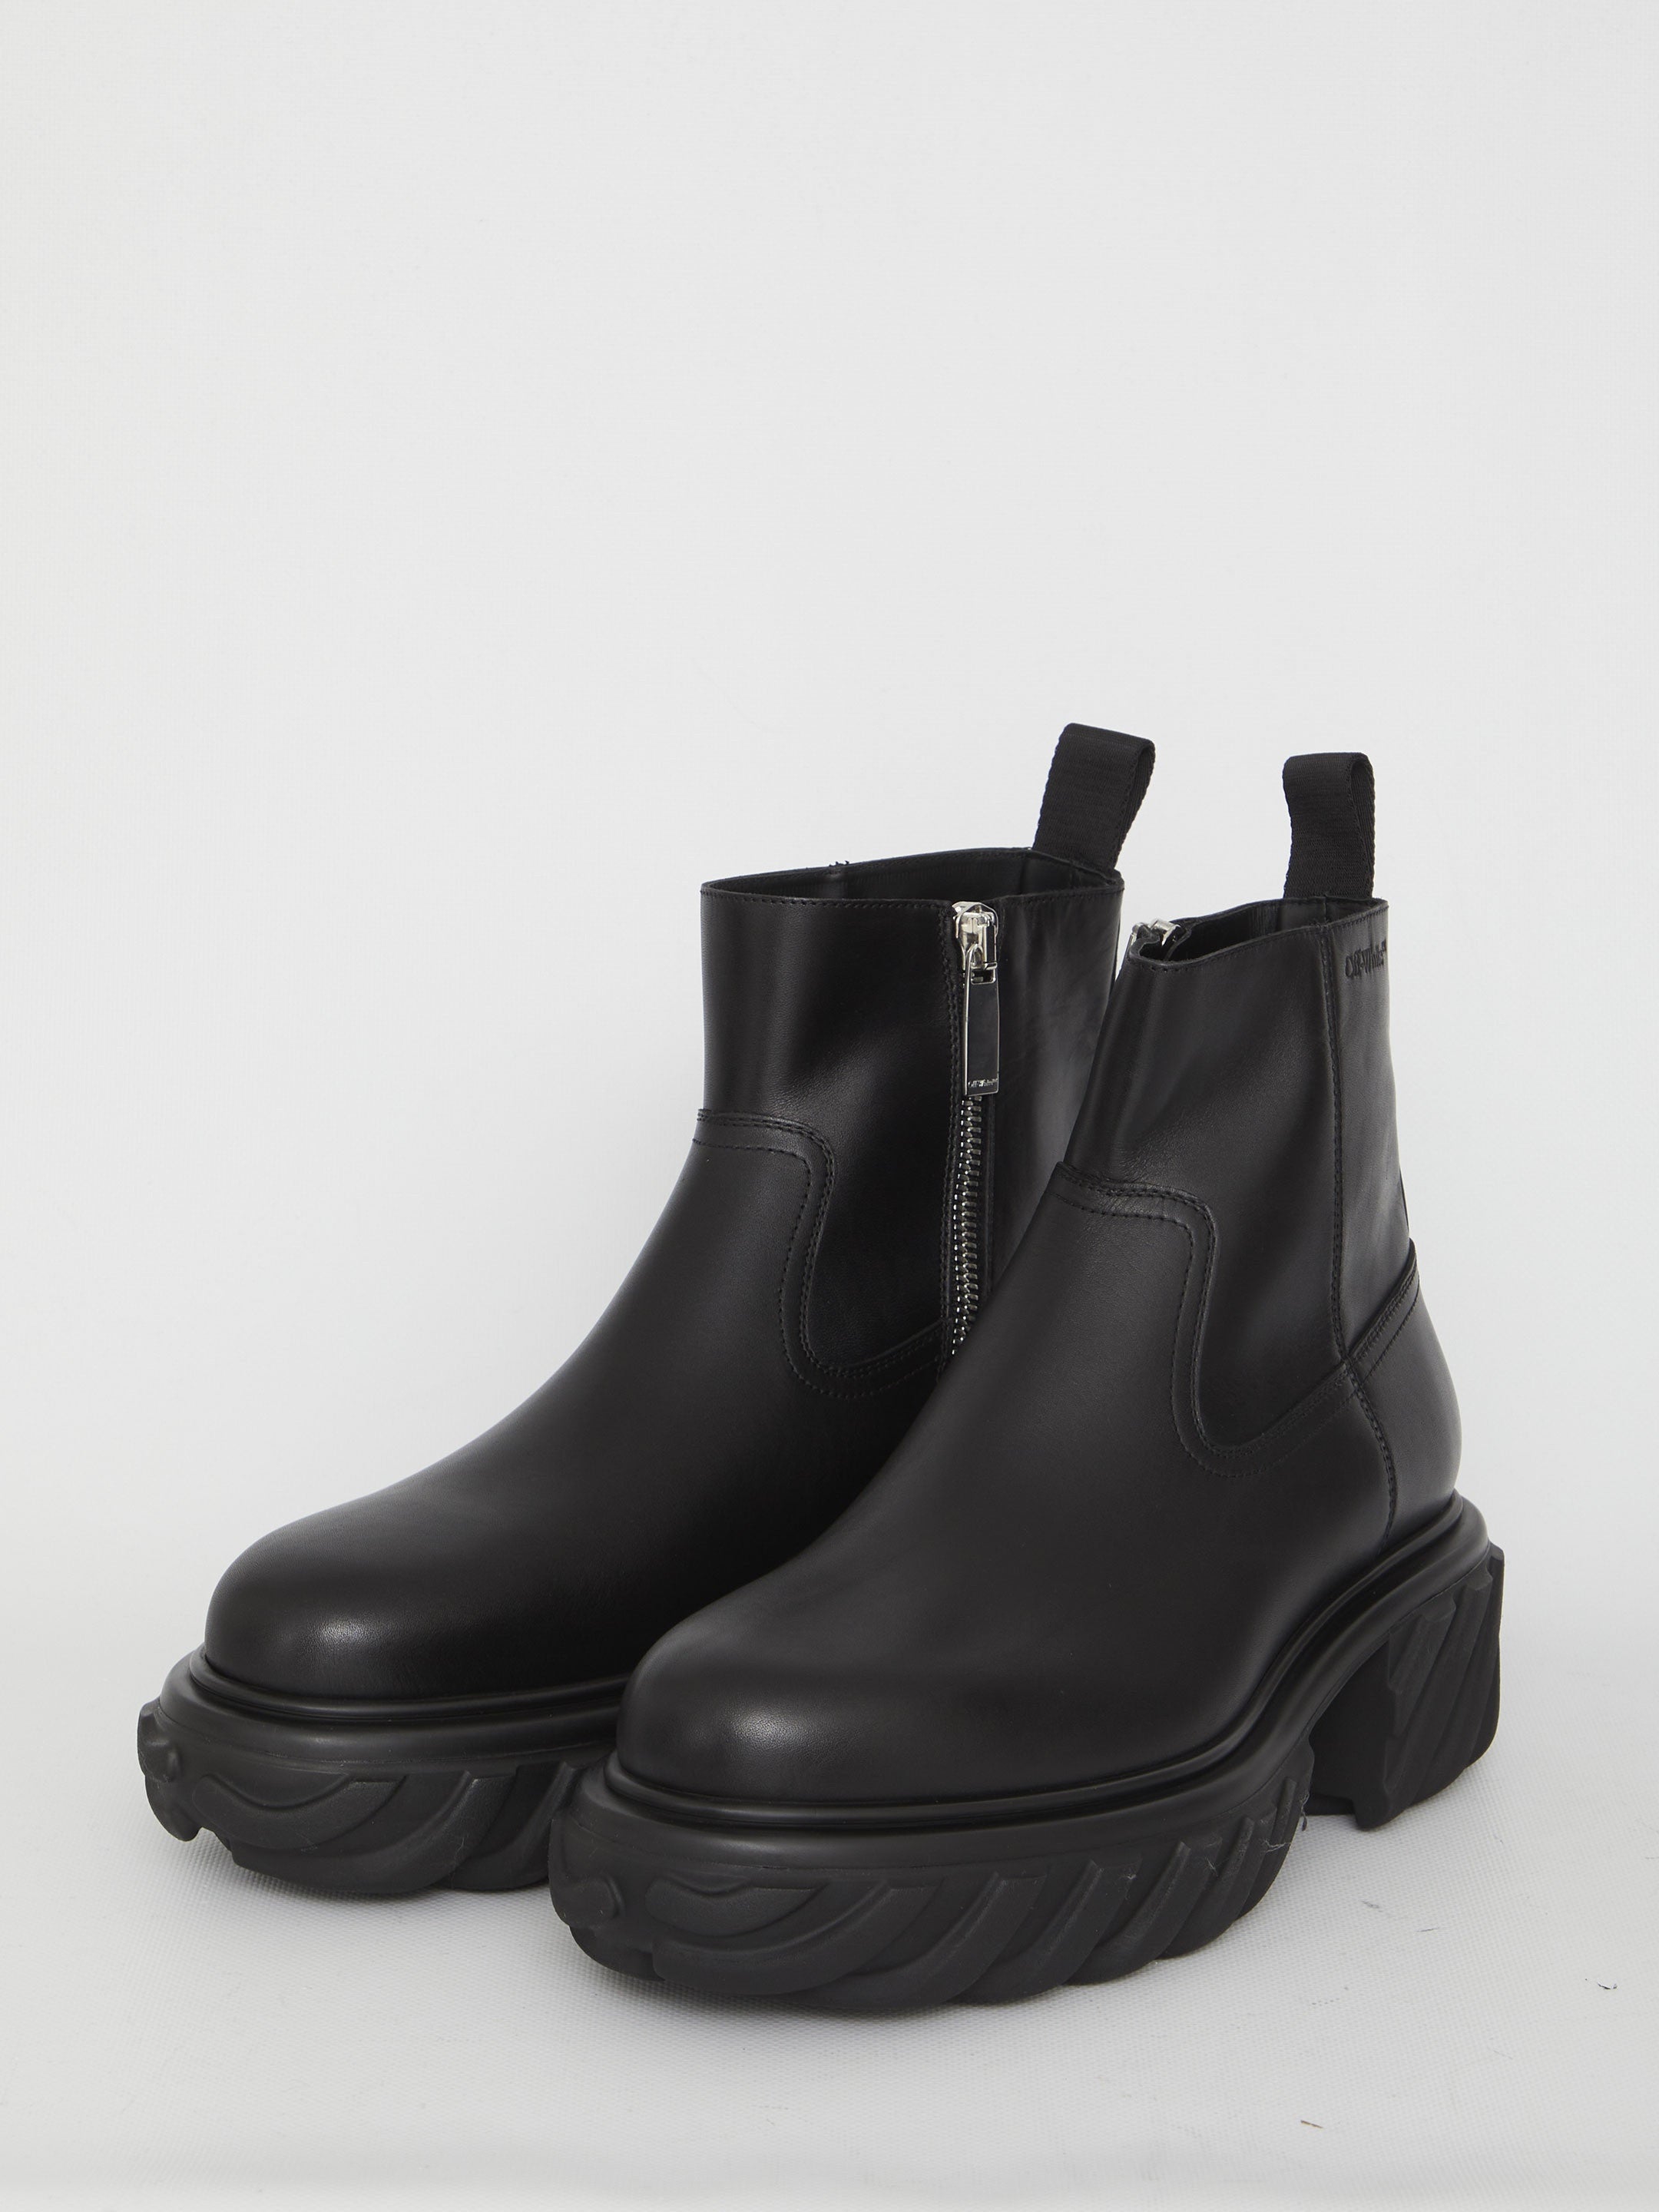 Tractor Motor ankle boots